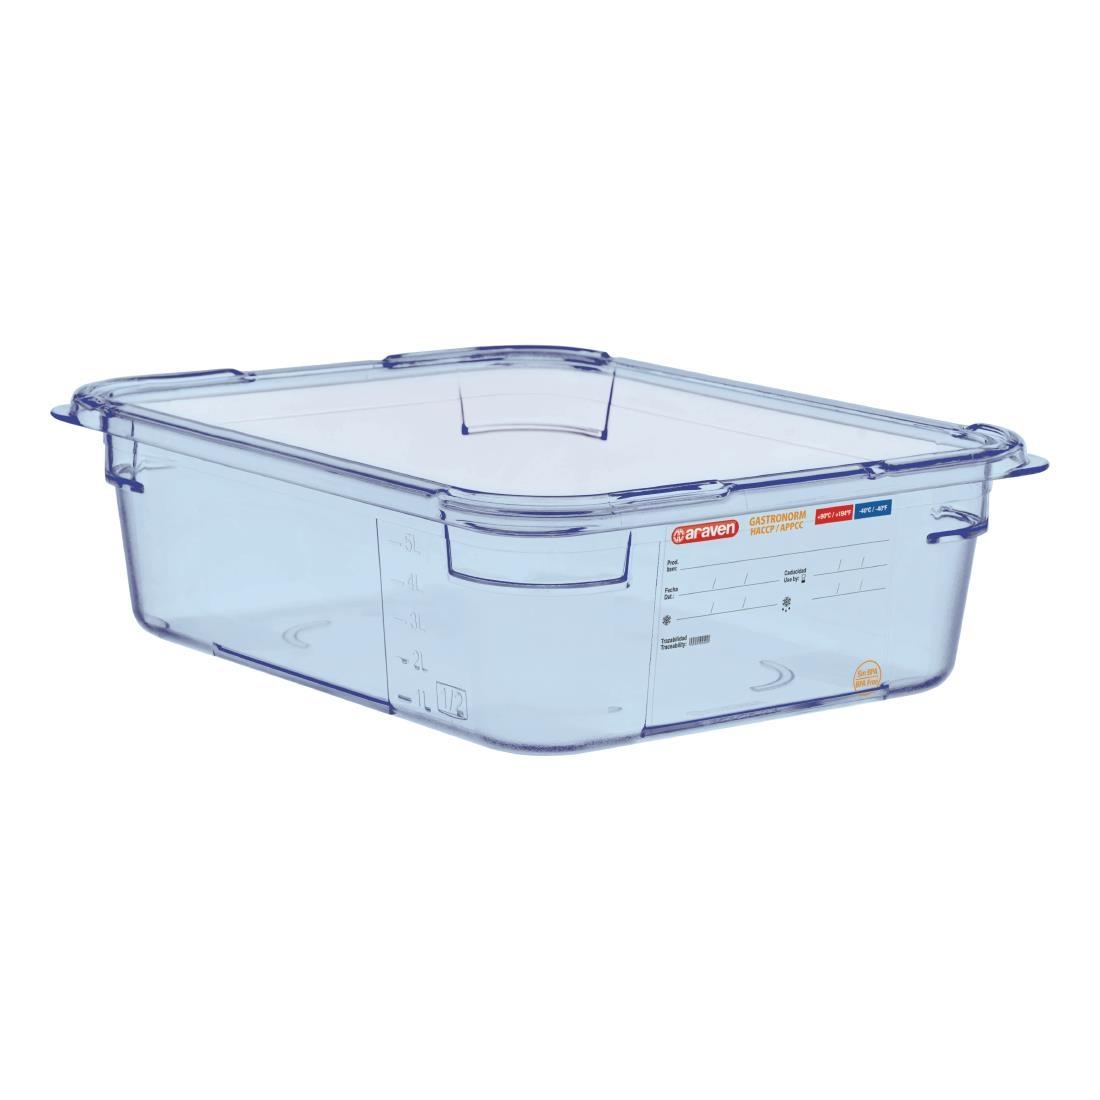 Araven ABS Food Storage Container Blue GN 1/2 100mm - GP584  - 1